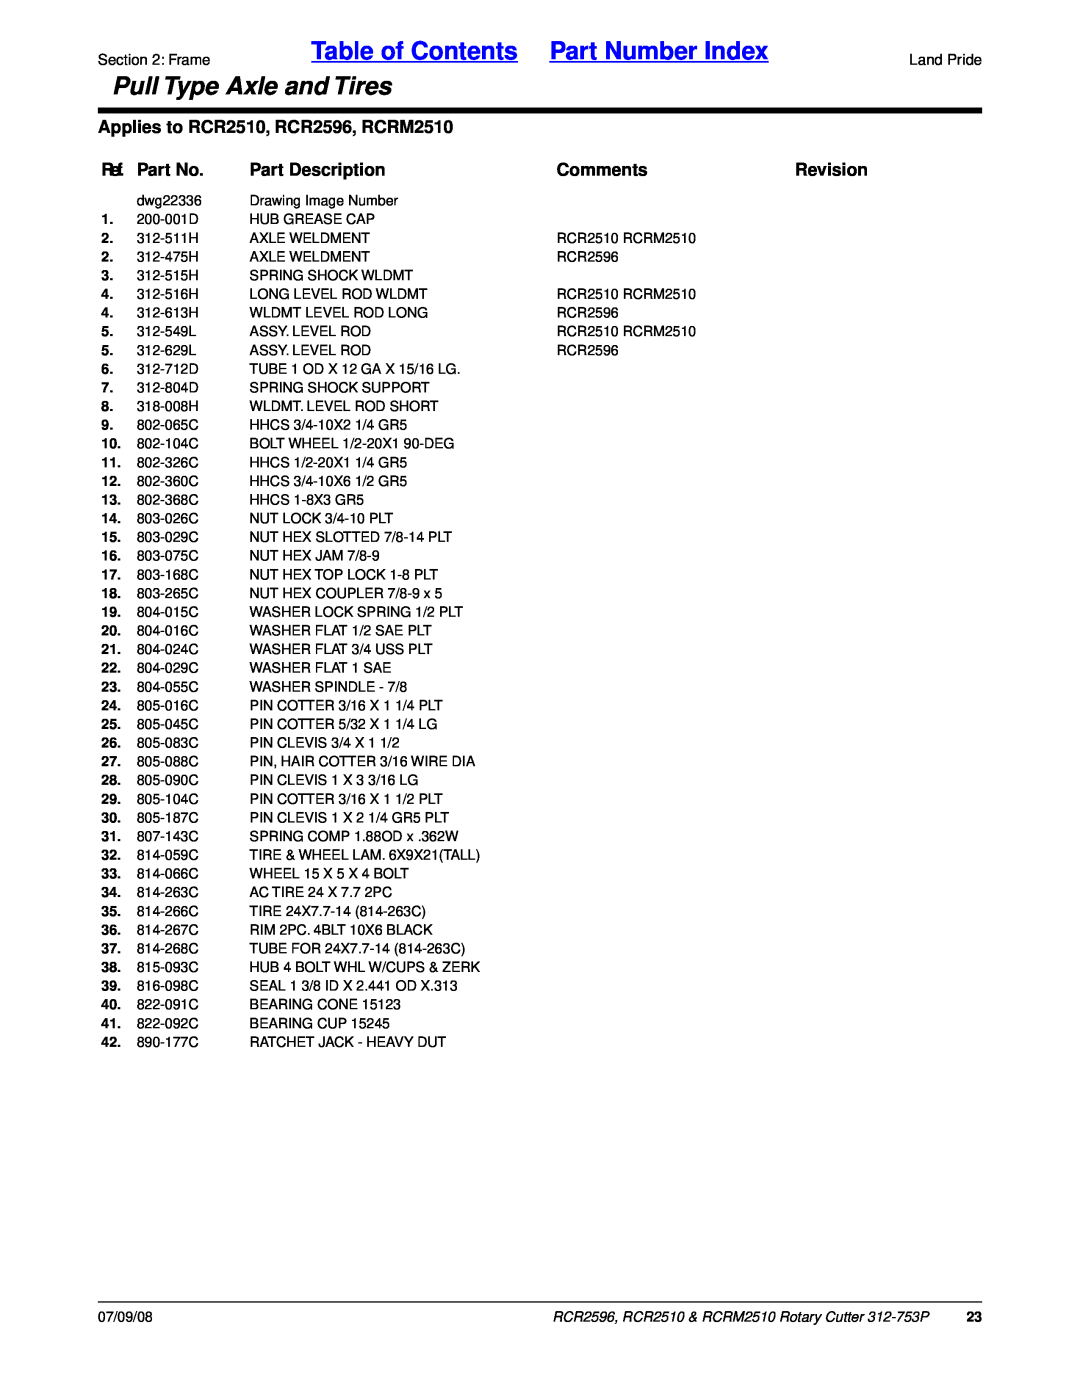 Land Pride manual Table of Contents Part Number Index, Pull Type Axle and Tires, Applies to RCR2510, RCR2596, RCRM2510 